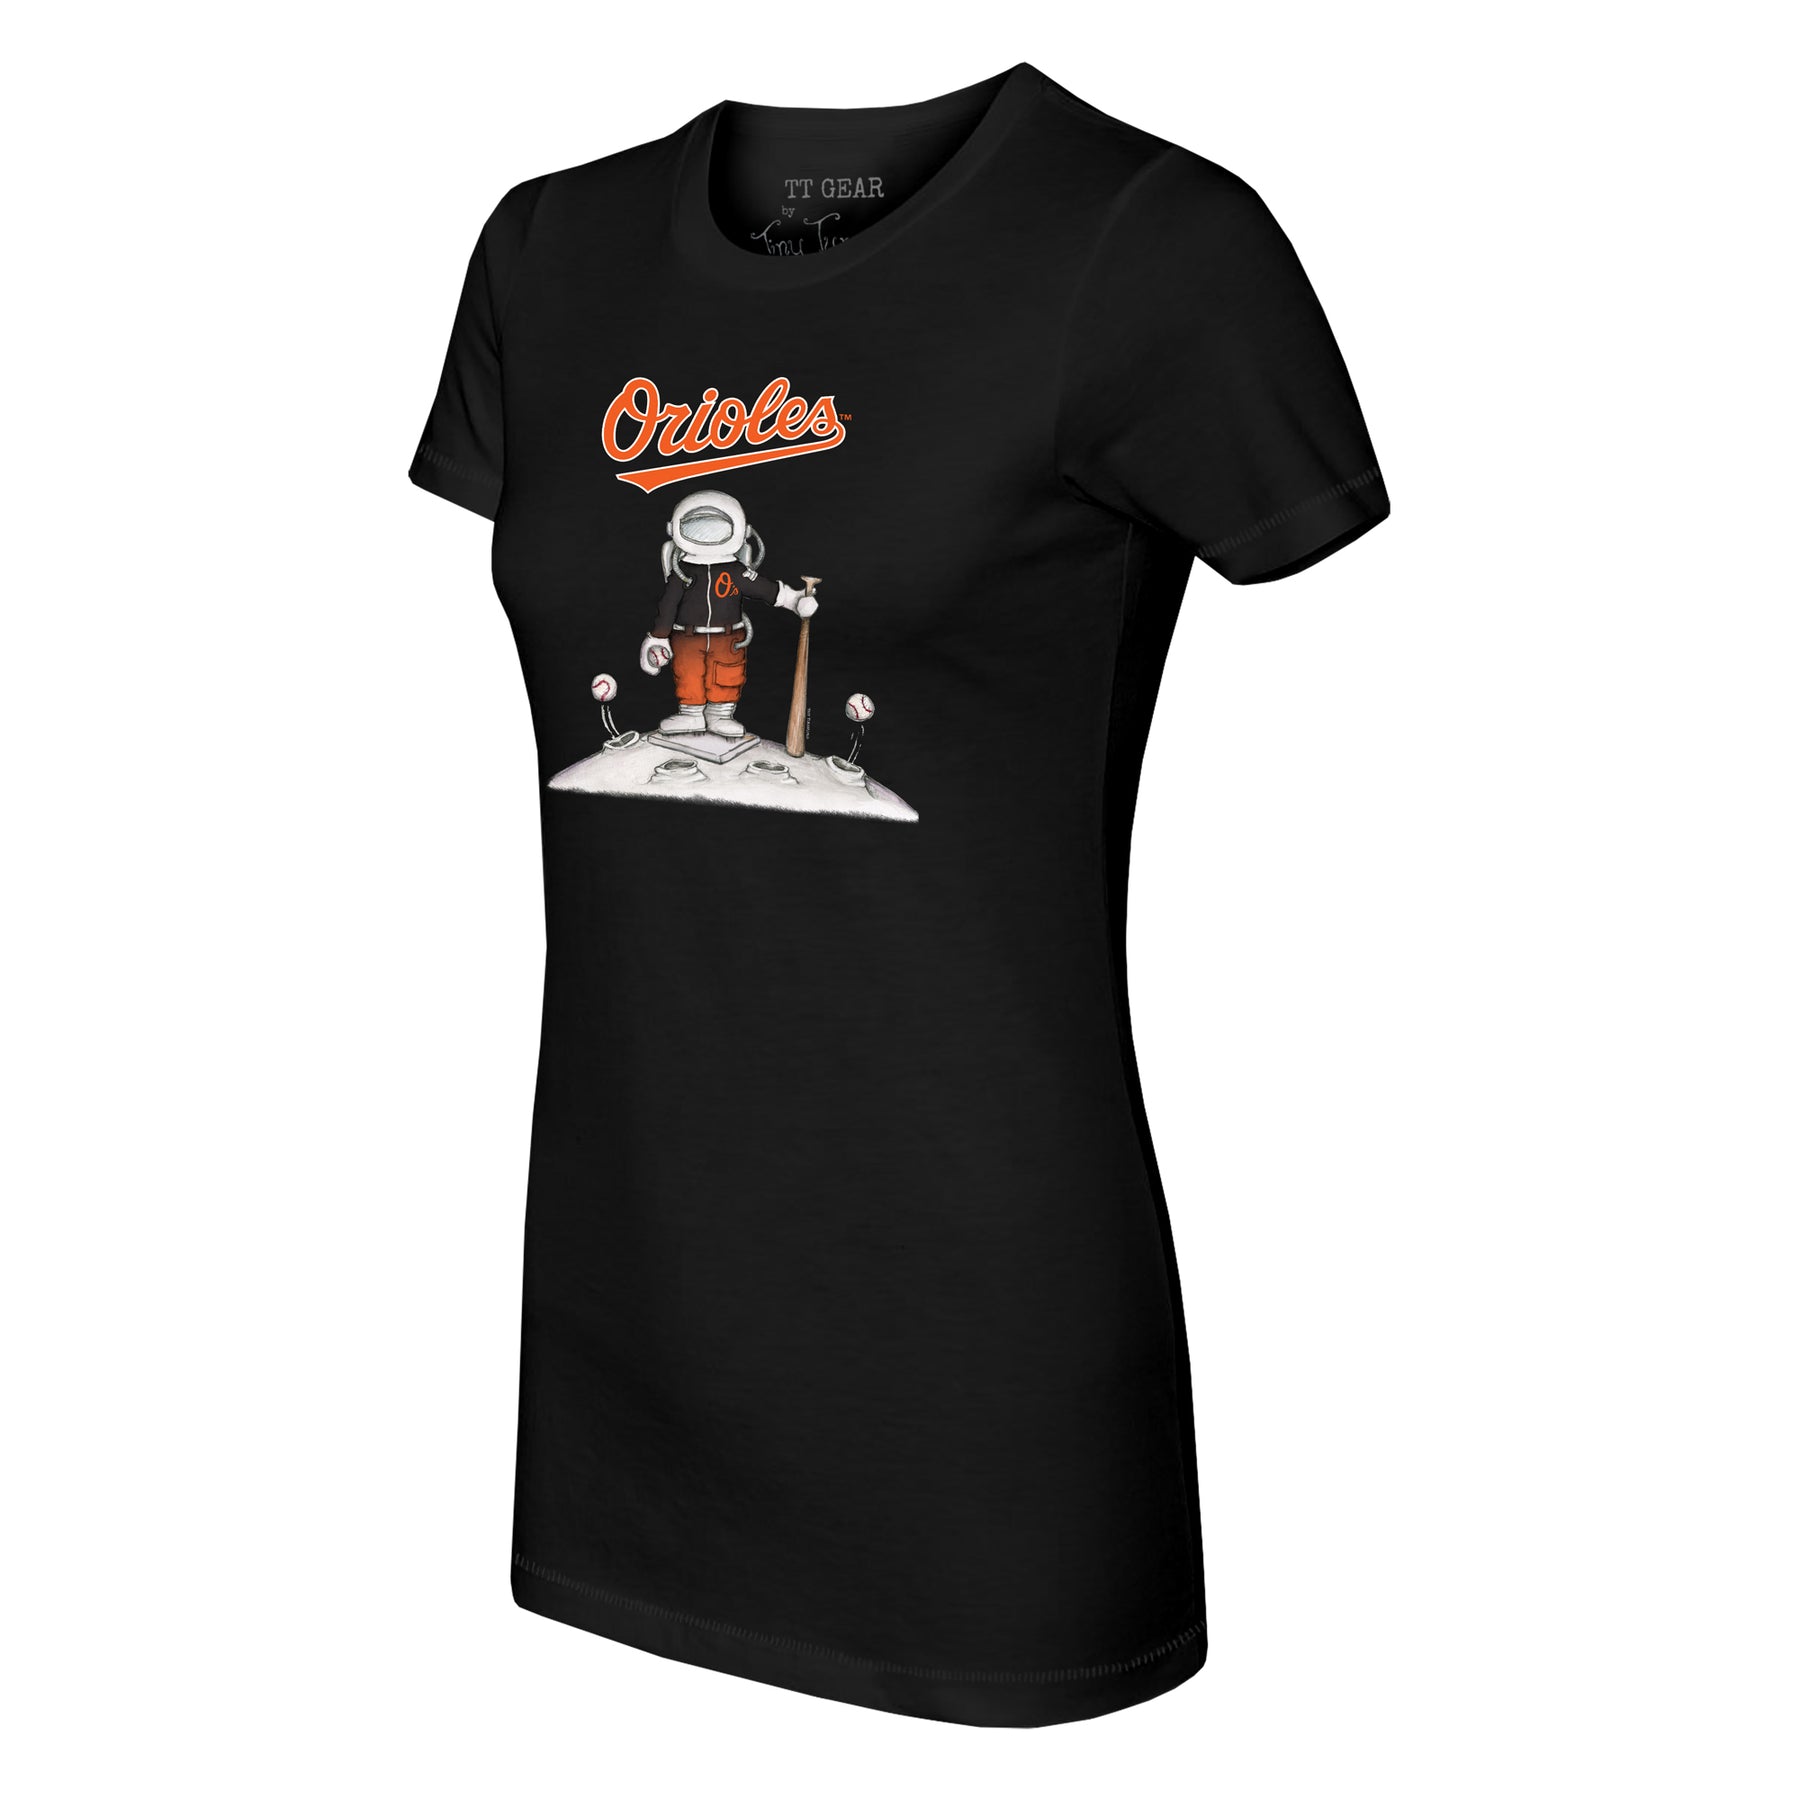 Baltimore Orioles Astronaut Fringe Tee Youth XL (14) / Black